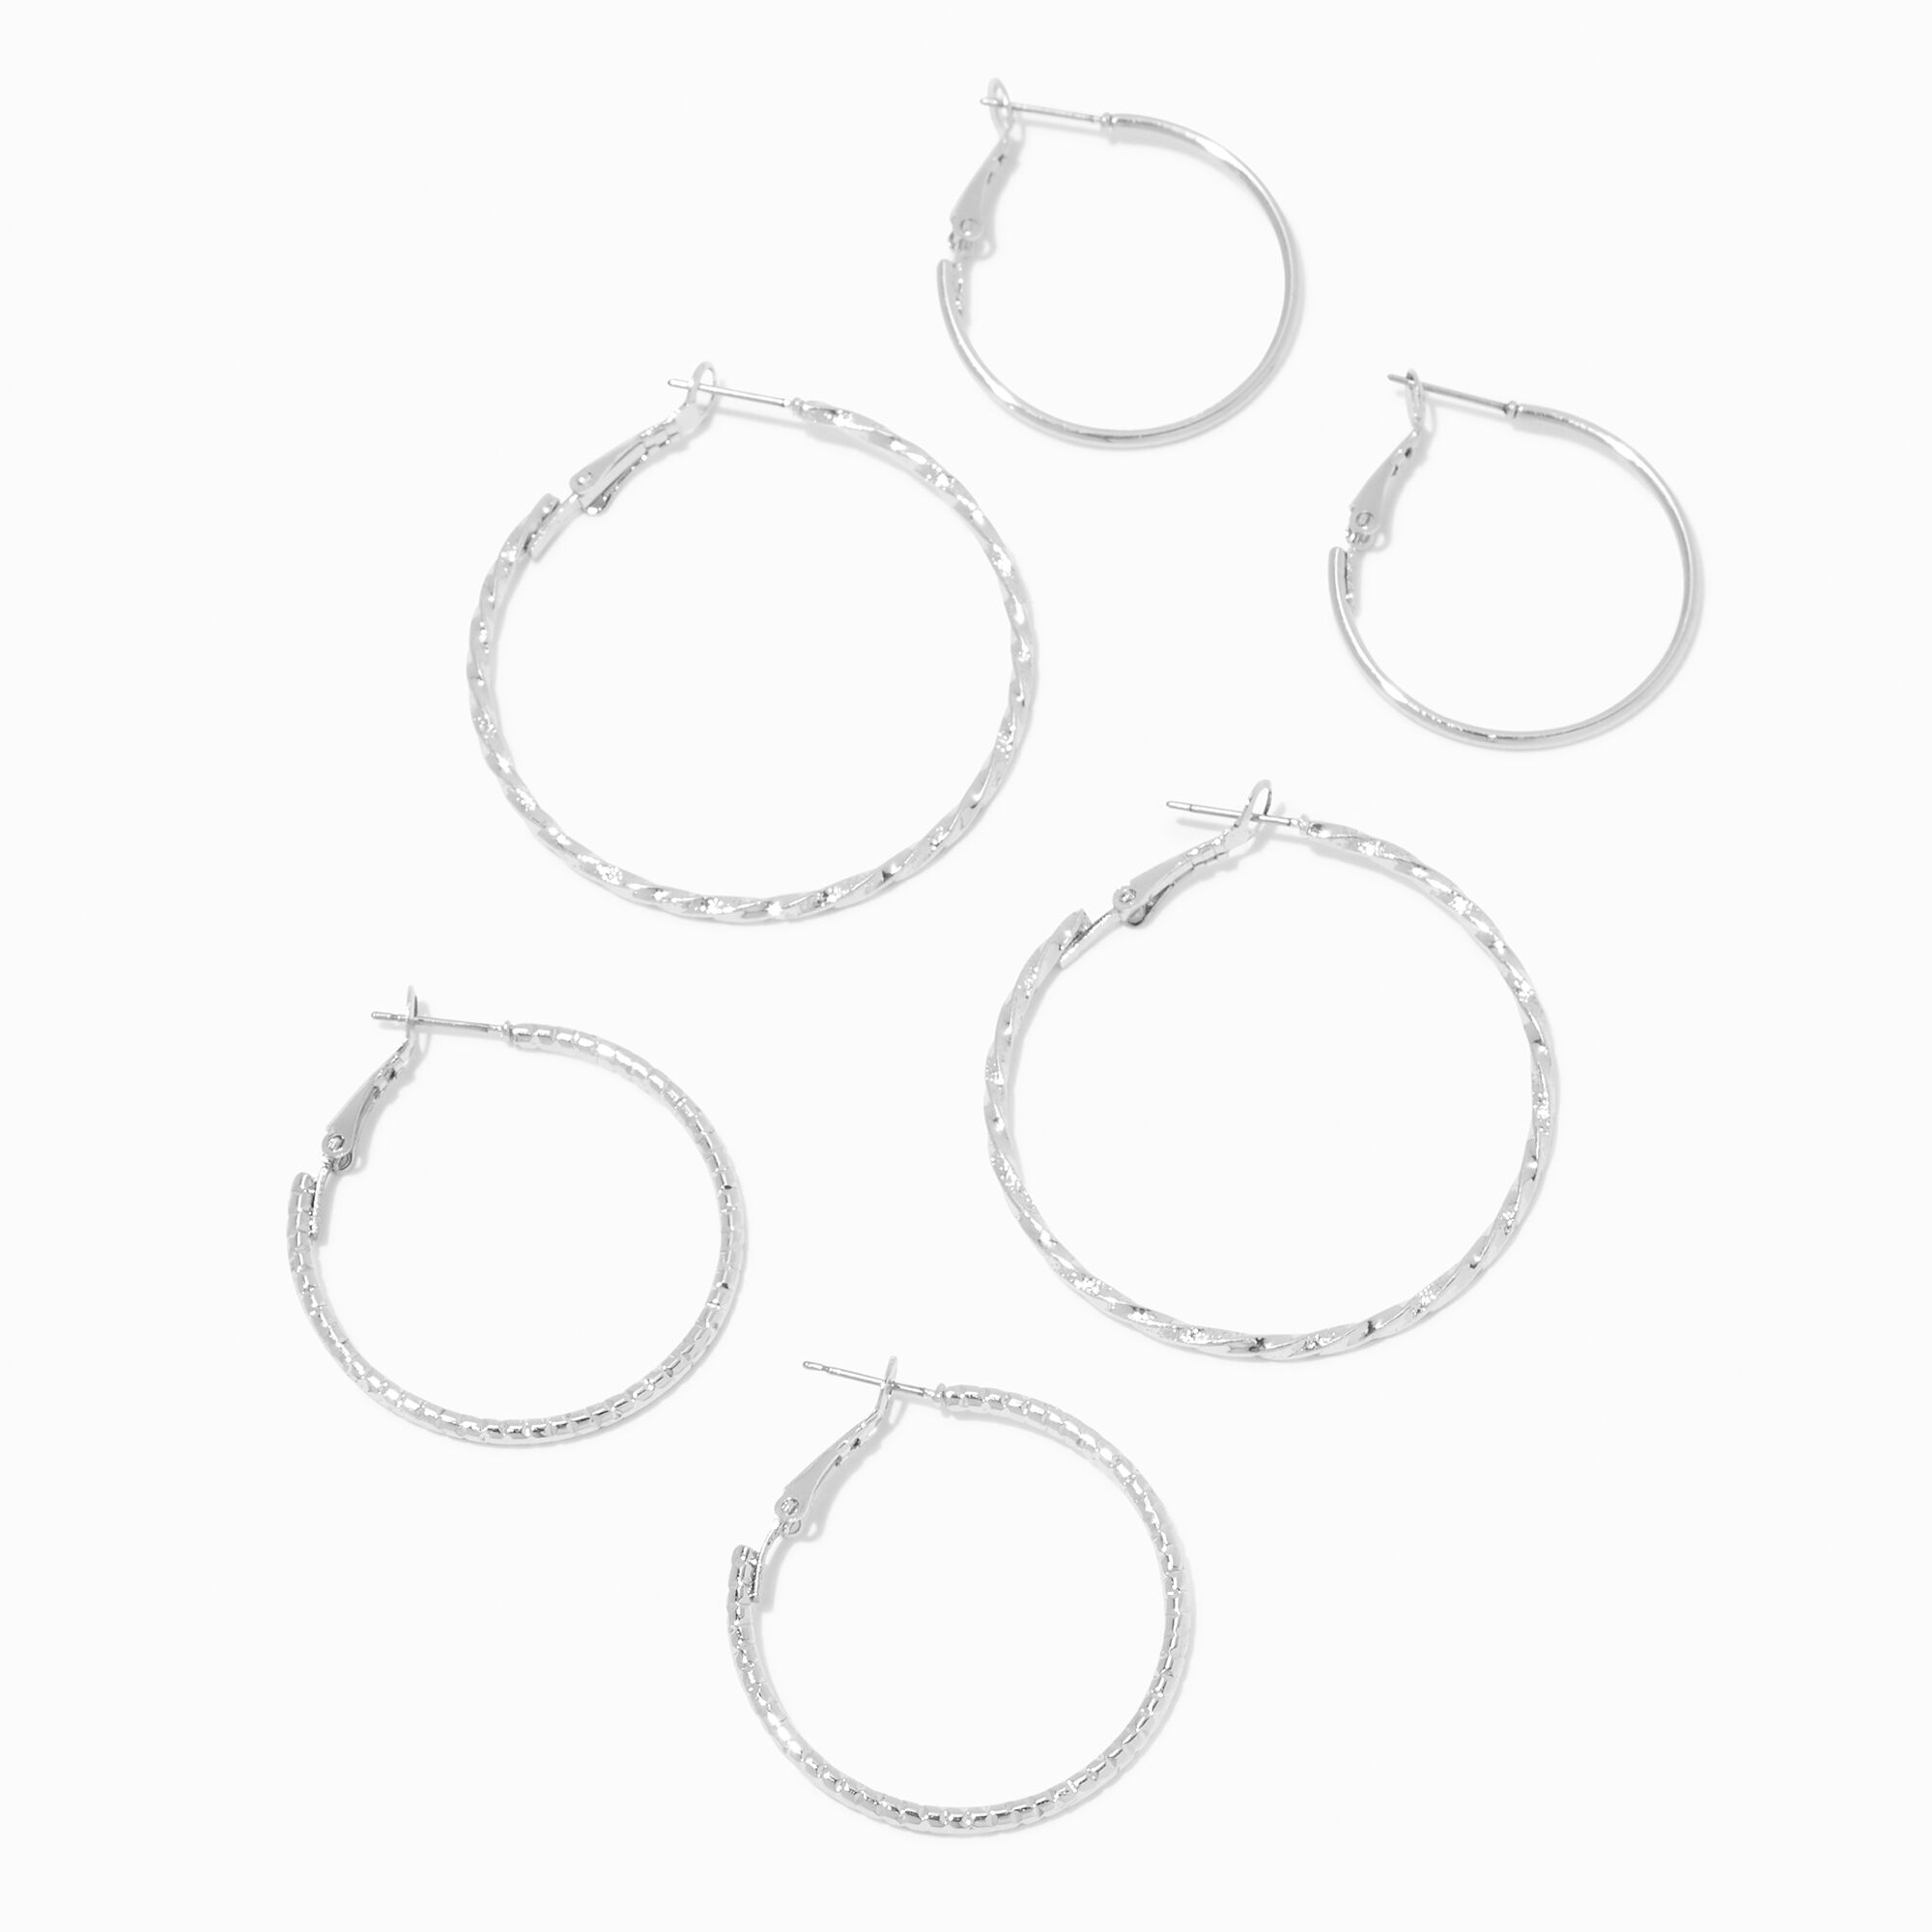 View Claires Tone Graduated Textured Hinge Hoop Earrings 3 Pack Silver information